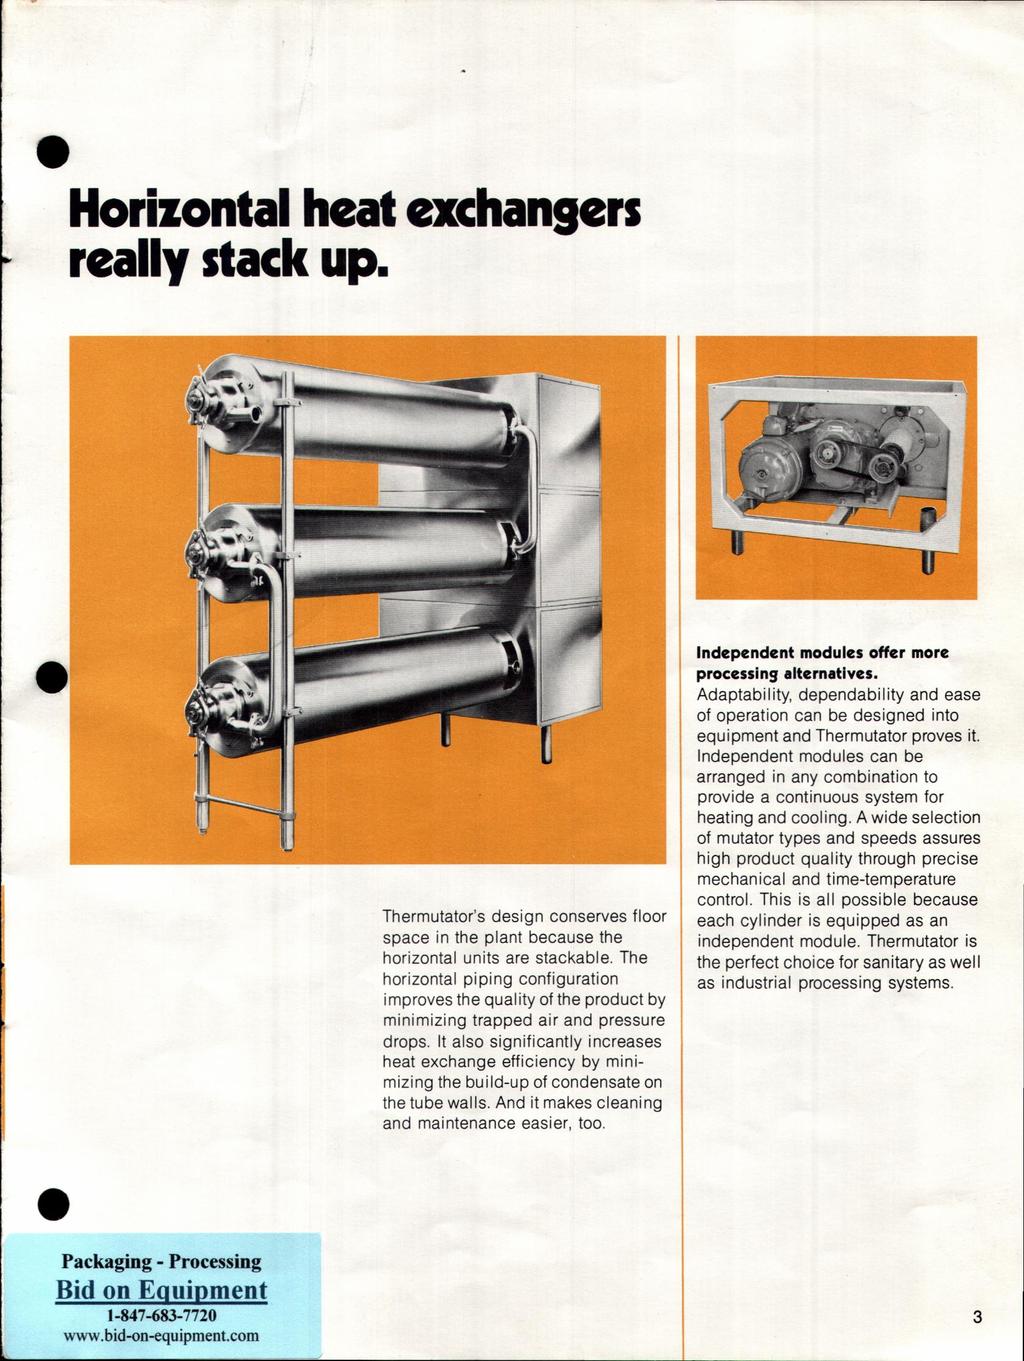 Horizontal heat exchangers really stack up. Thermutator's design conserves floor space in the plant because the horizontal units are stackable.